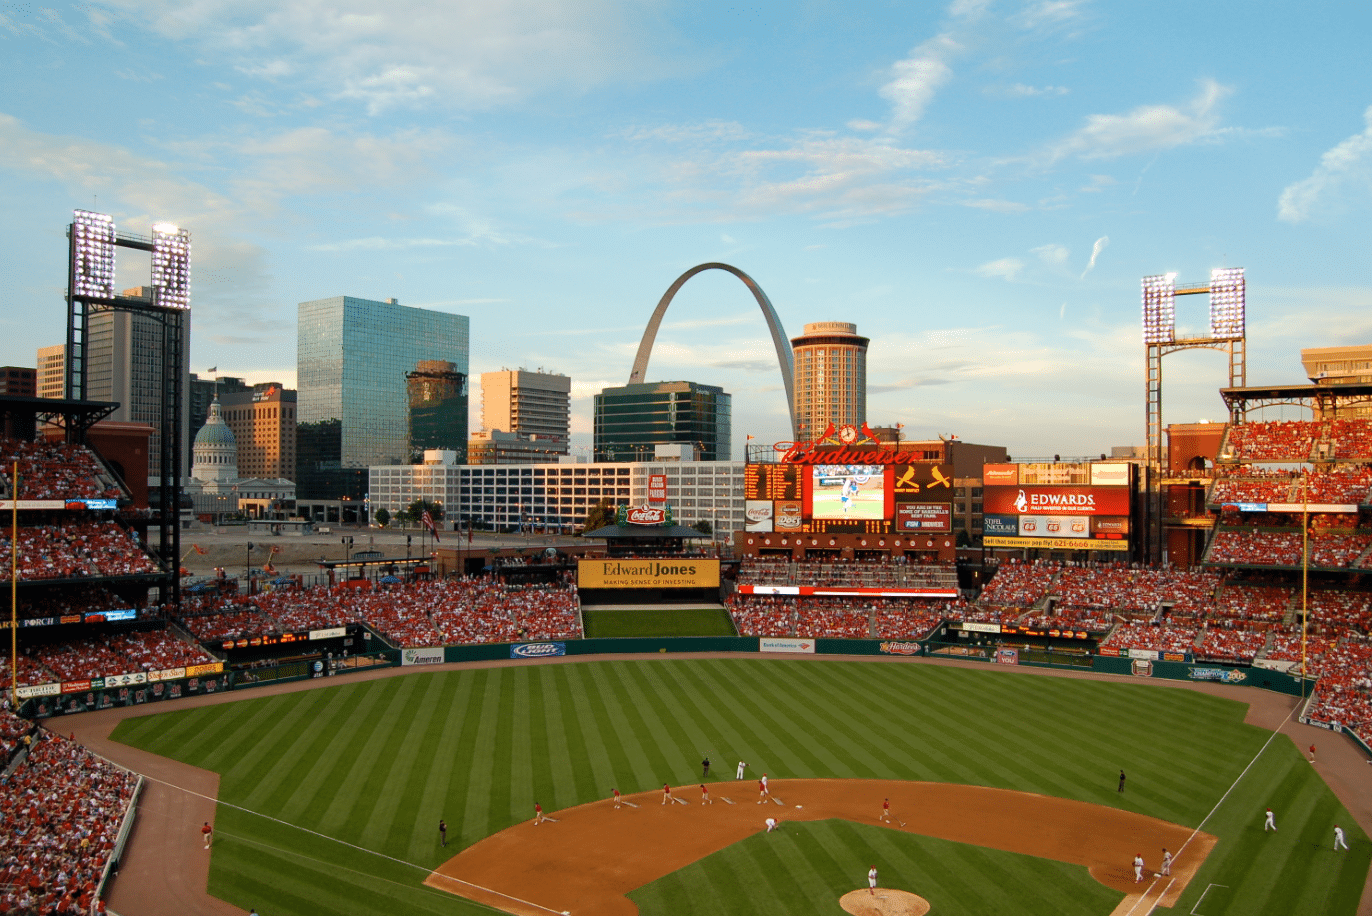 St. Louis Cardinals baseball field by the arch